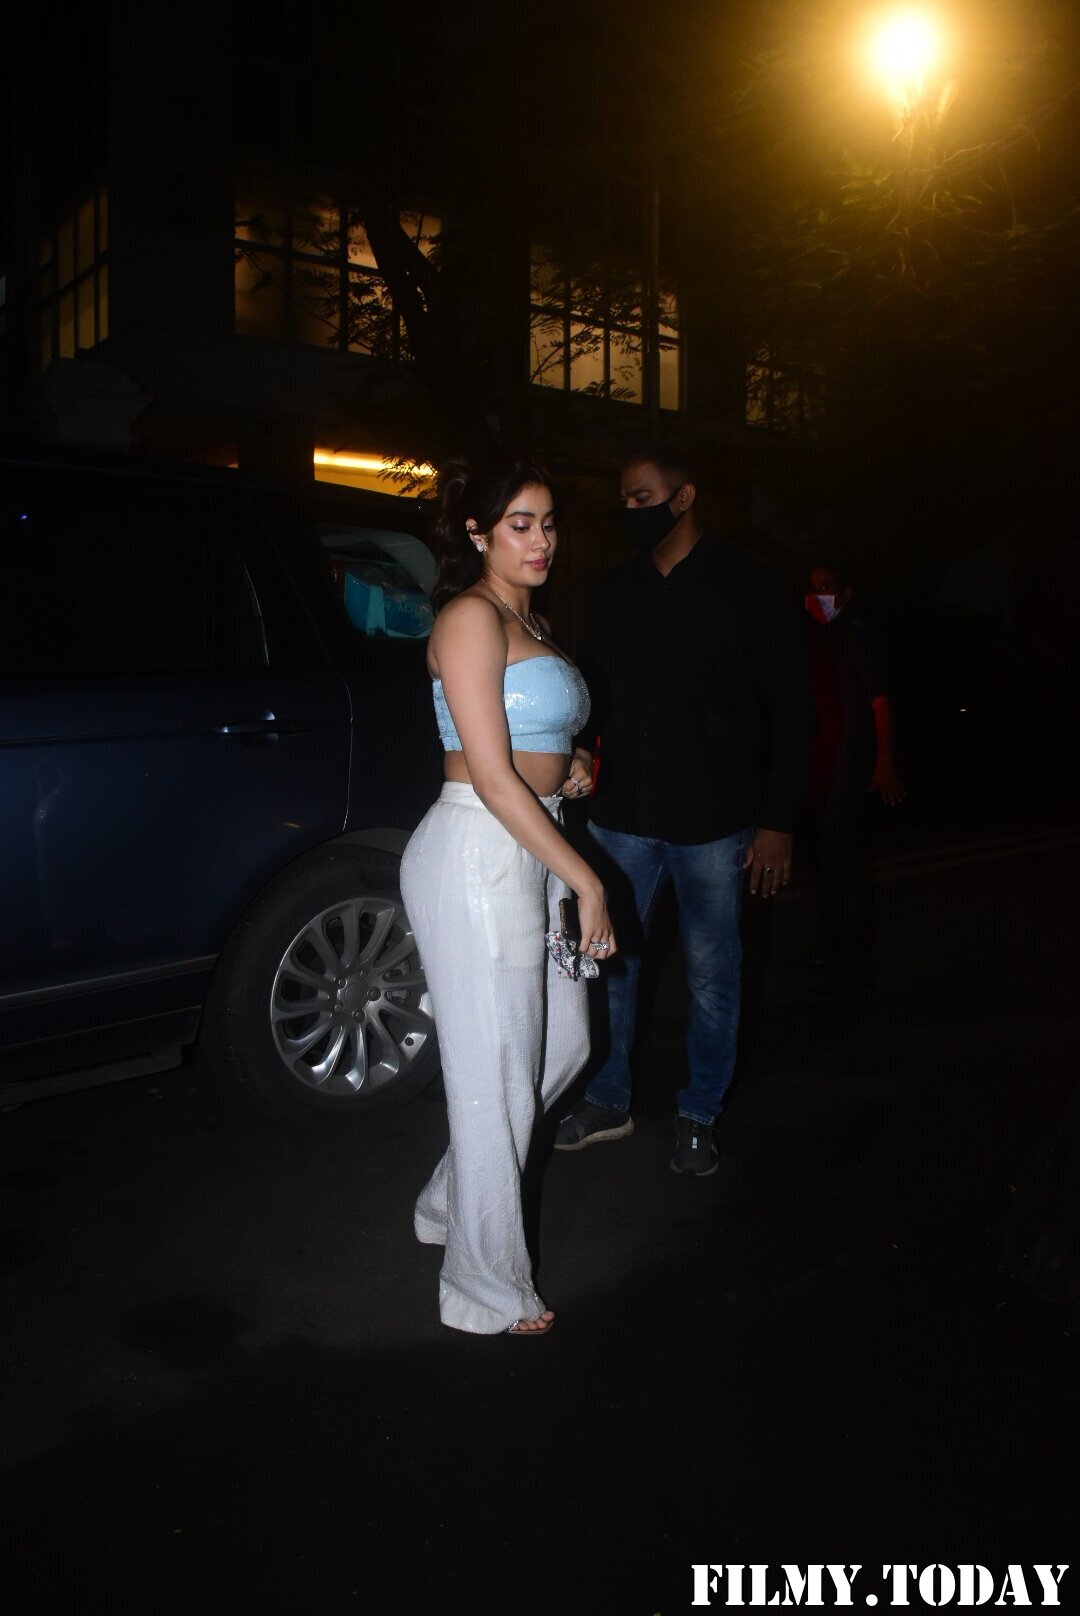 Janhvi Kapoor - Photos: Celebs At Rhea Kapoor Wedding Party At Anil Kapoor's House | Picture 1822251